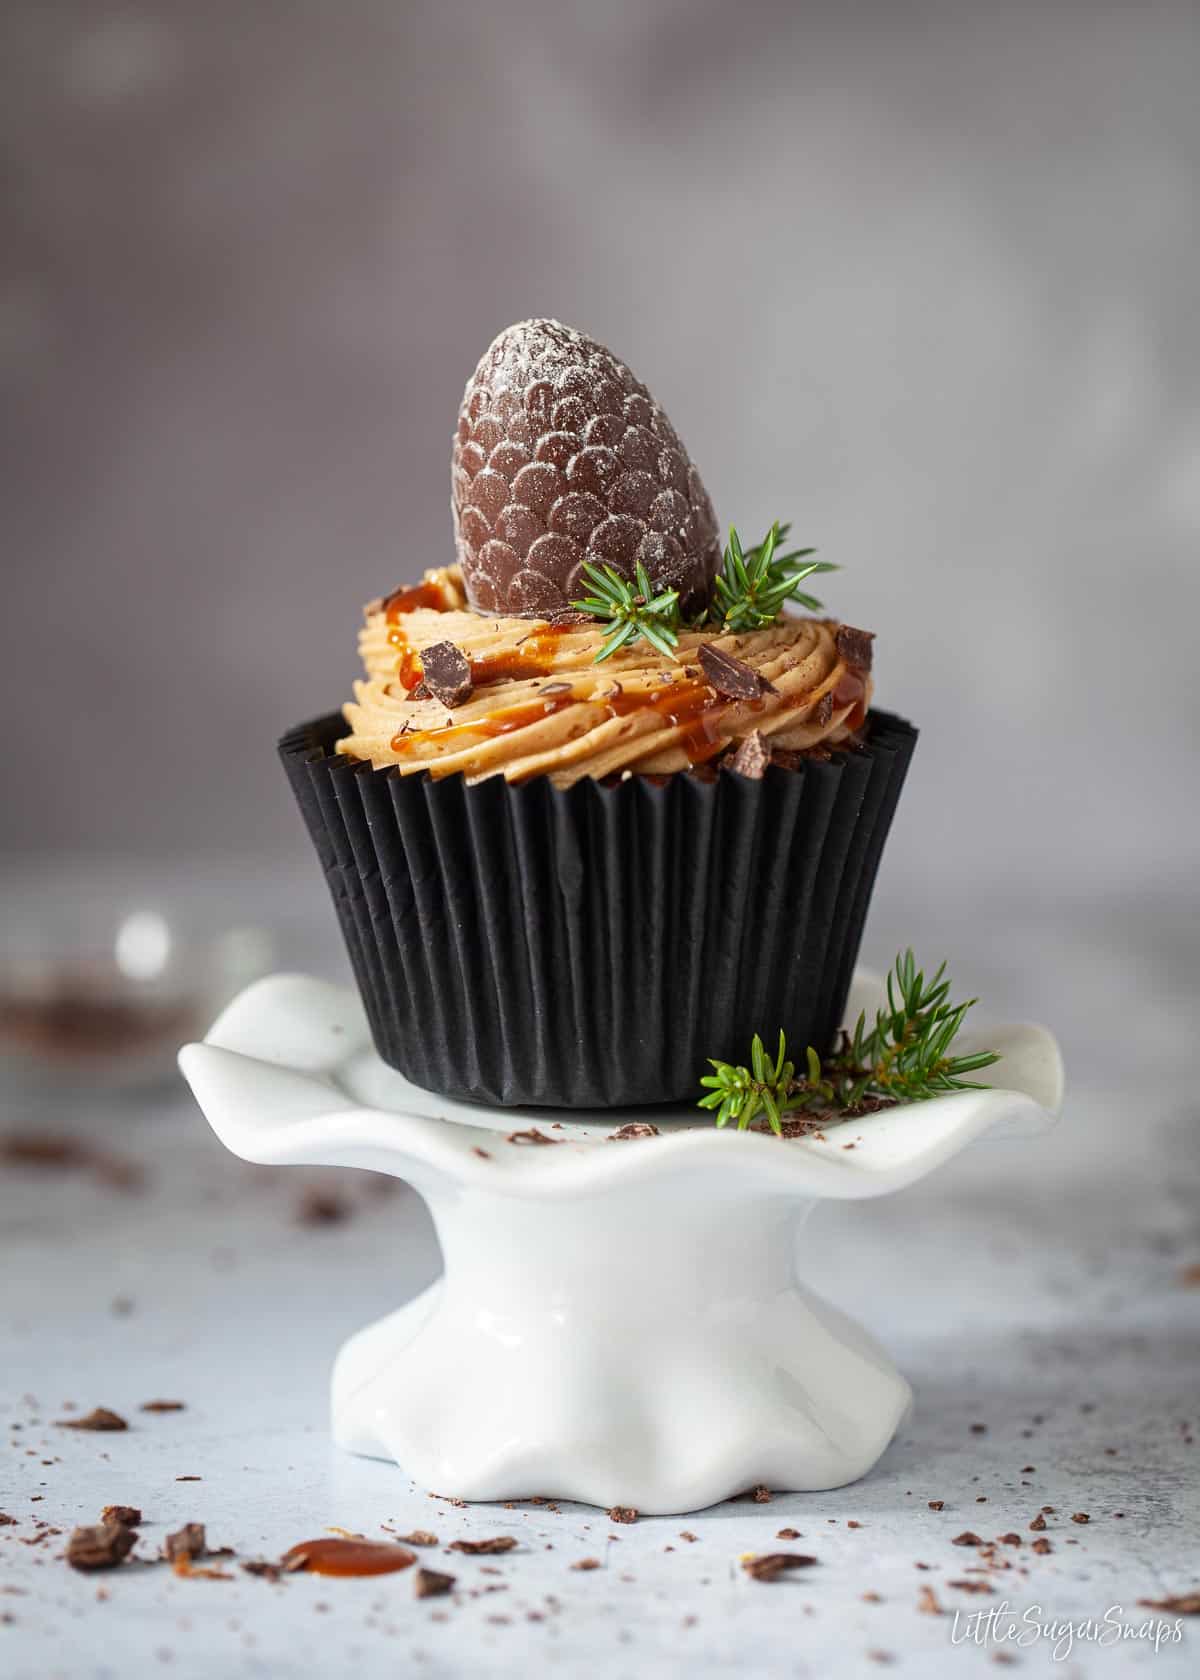 A coffee cupcake on a stand. The cake is topped with buttercream, caramel and a chocolate.